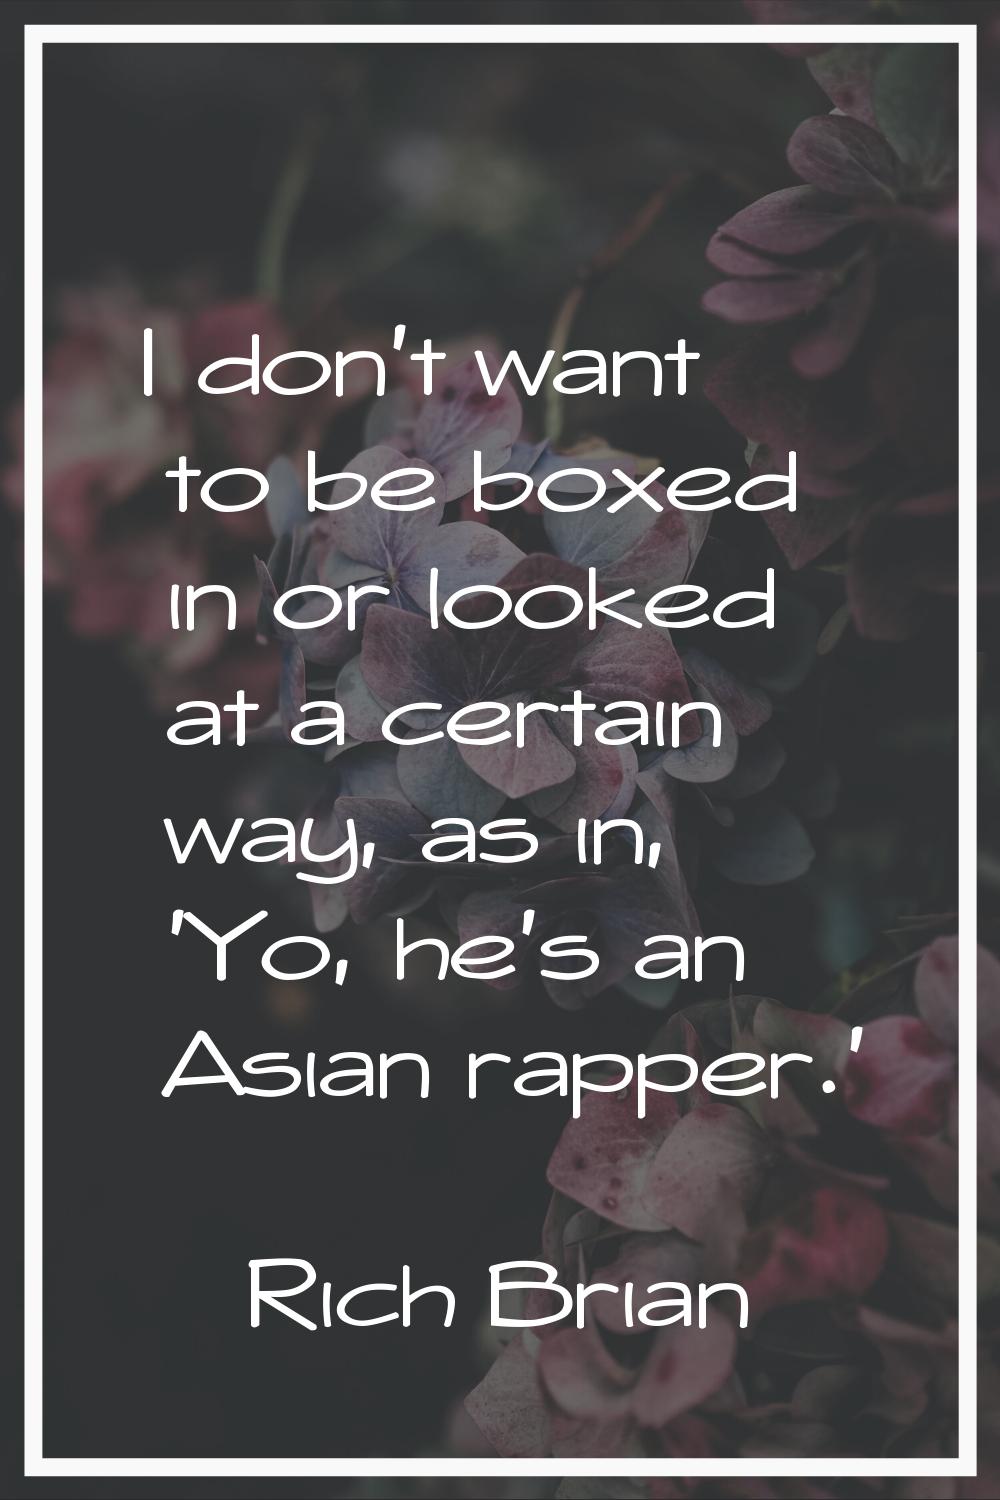 I don't want to be boxed in or looked at a certain way, as in, 'Yo, he's an Asian rapper.'